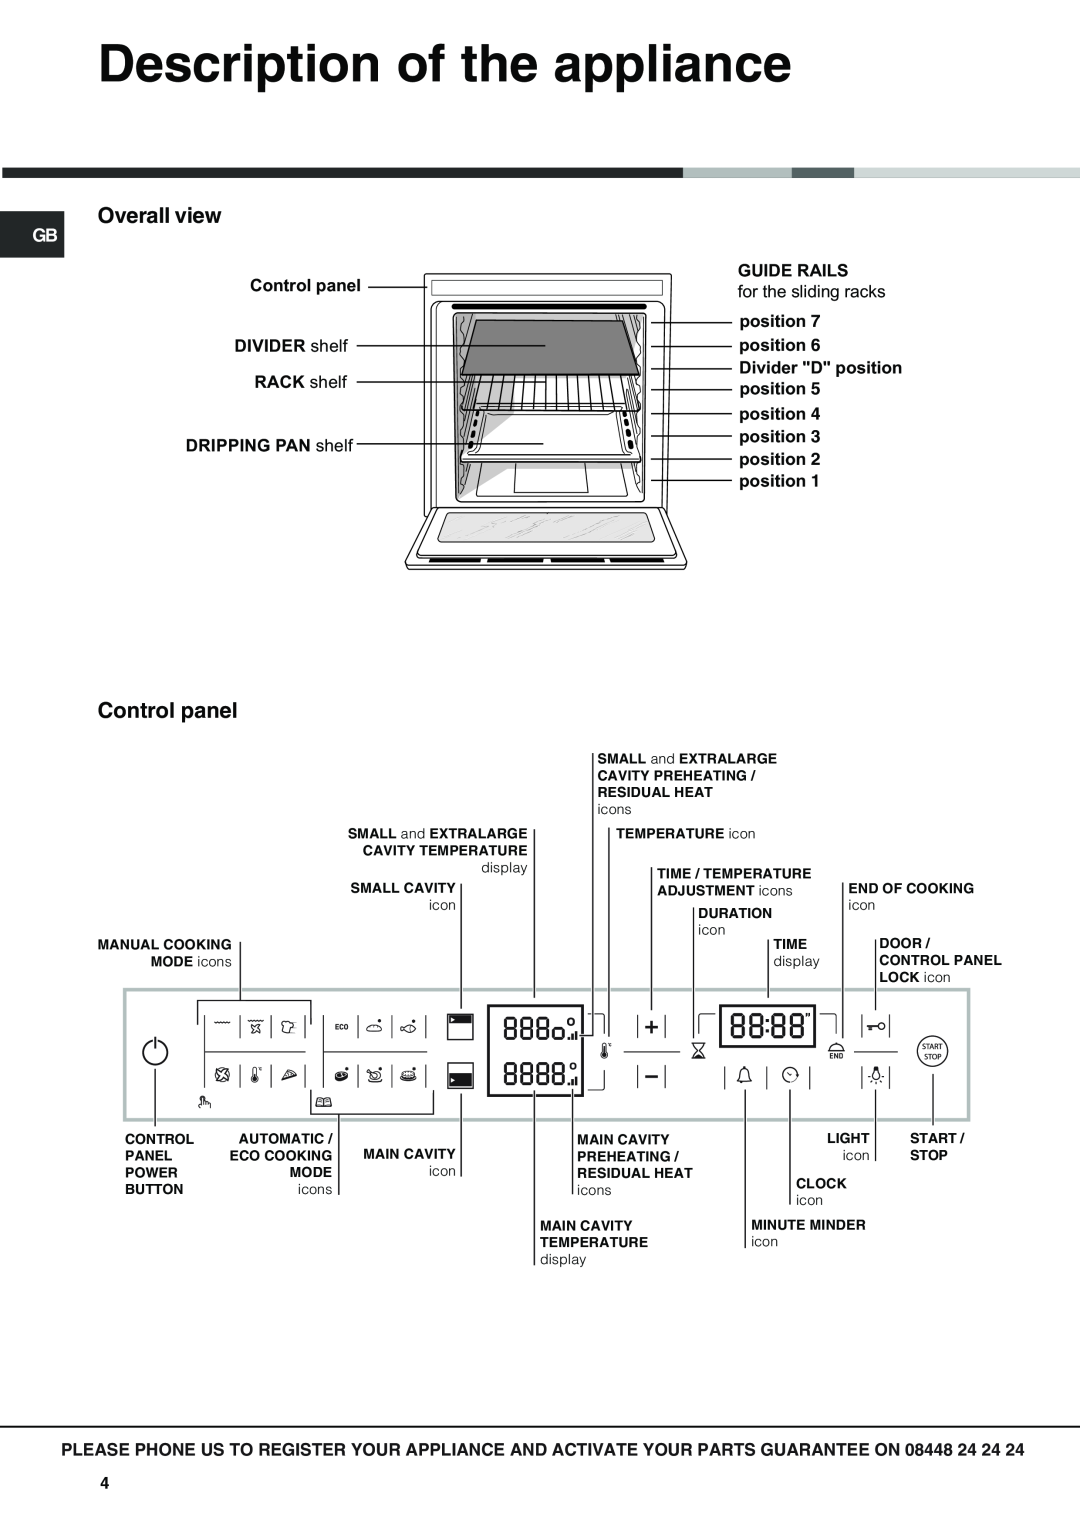 Hotpoint OSX 1036N D CX Description of the appliance, Overall view, Control panel, Guide Rails, for the sliding racks 